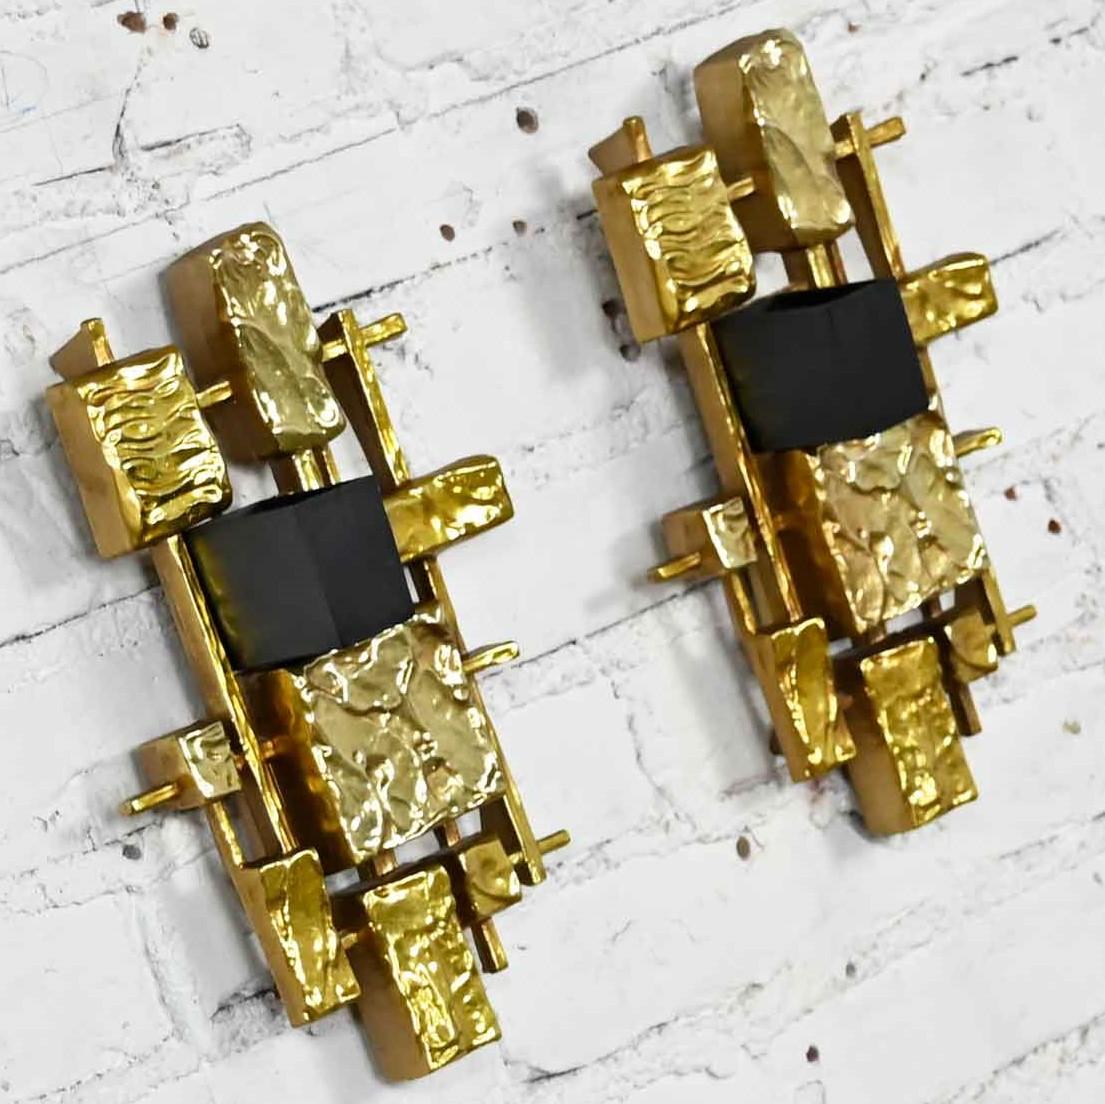 Stunning Mid-Century Modern or brutalist gold and black plastic wall sconces model #4050 by Dart Industries (previously known as Syroco the well-known early 20th century ornamental décor manufacturing company.). Beautiful condition, keeping in mind